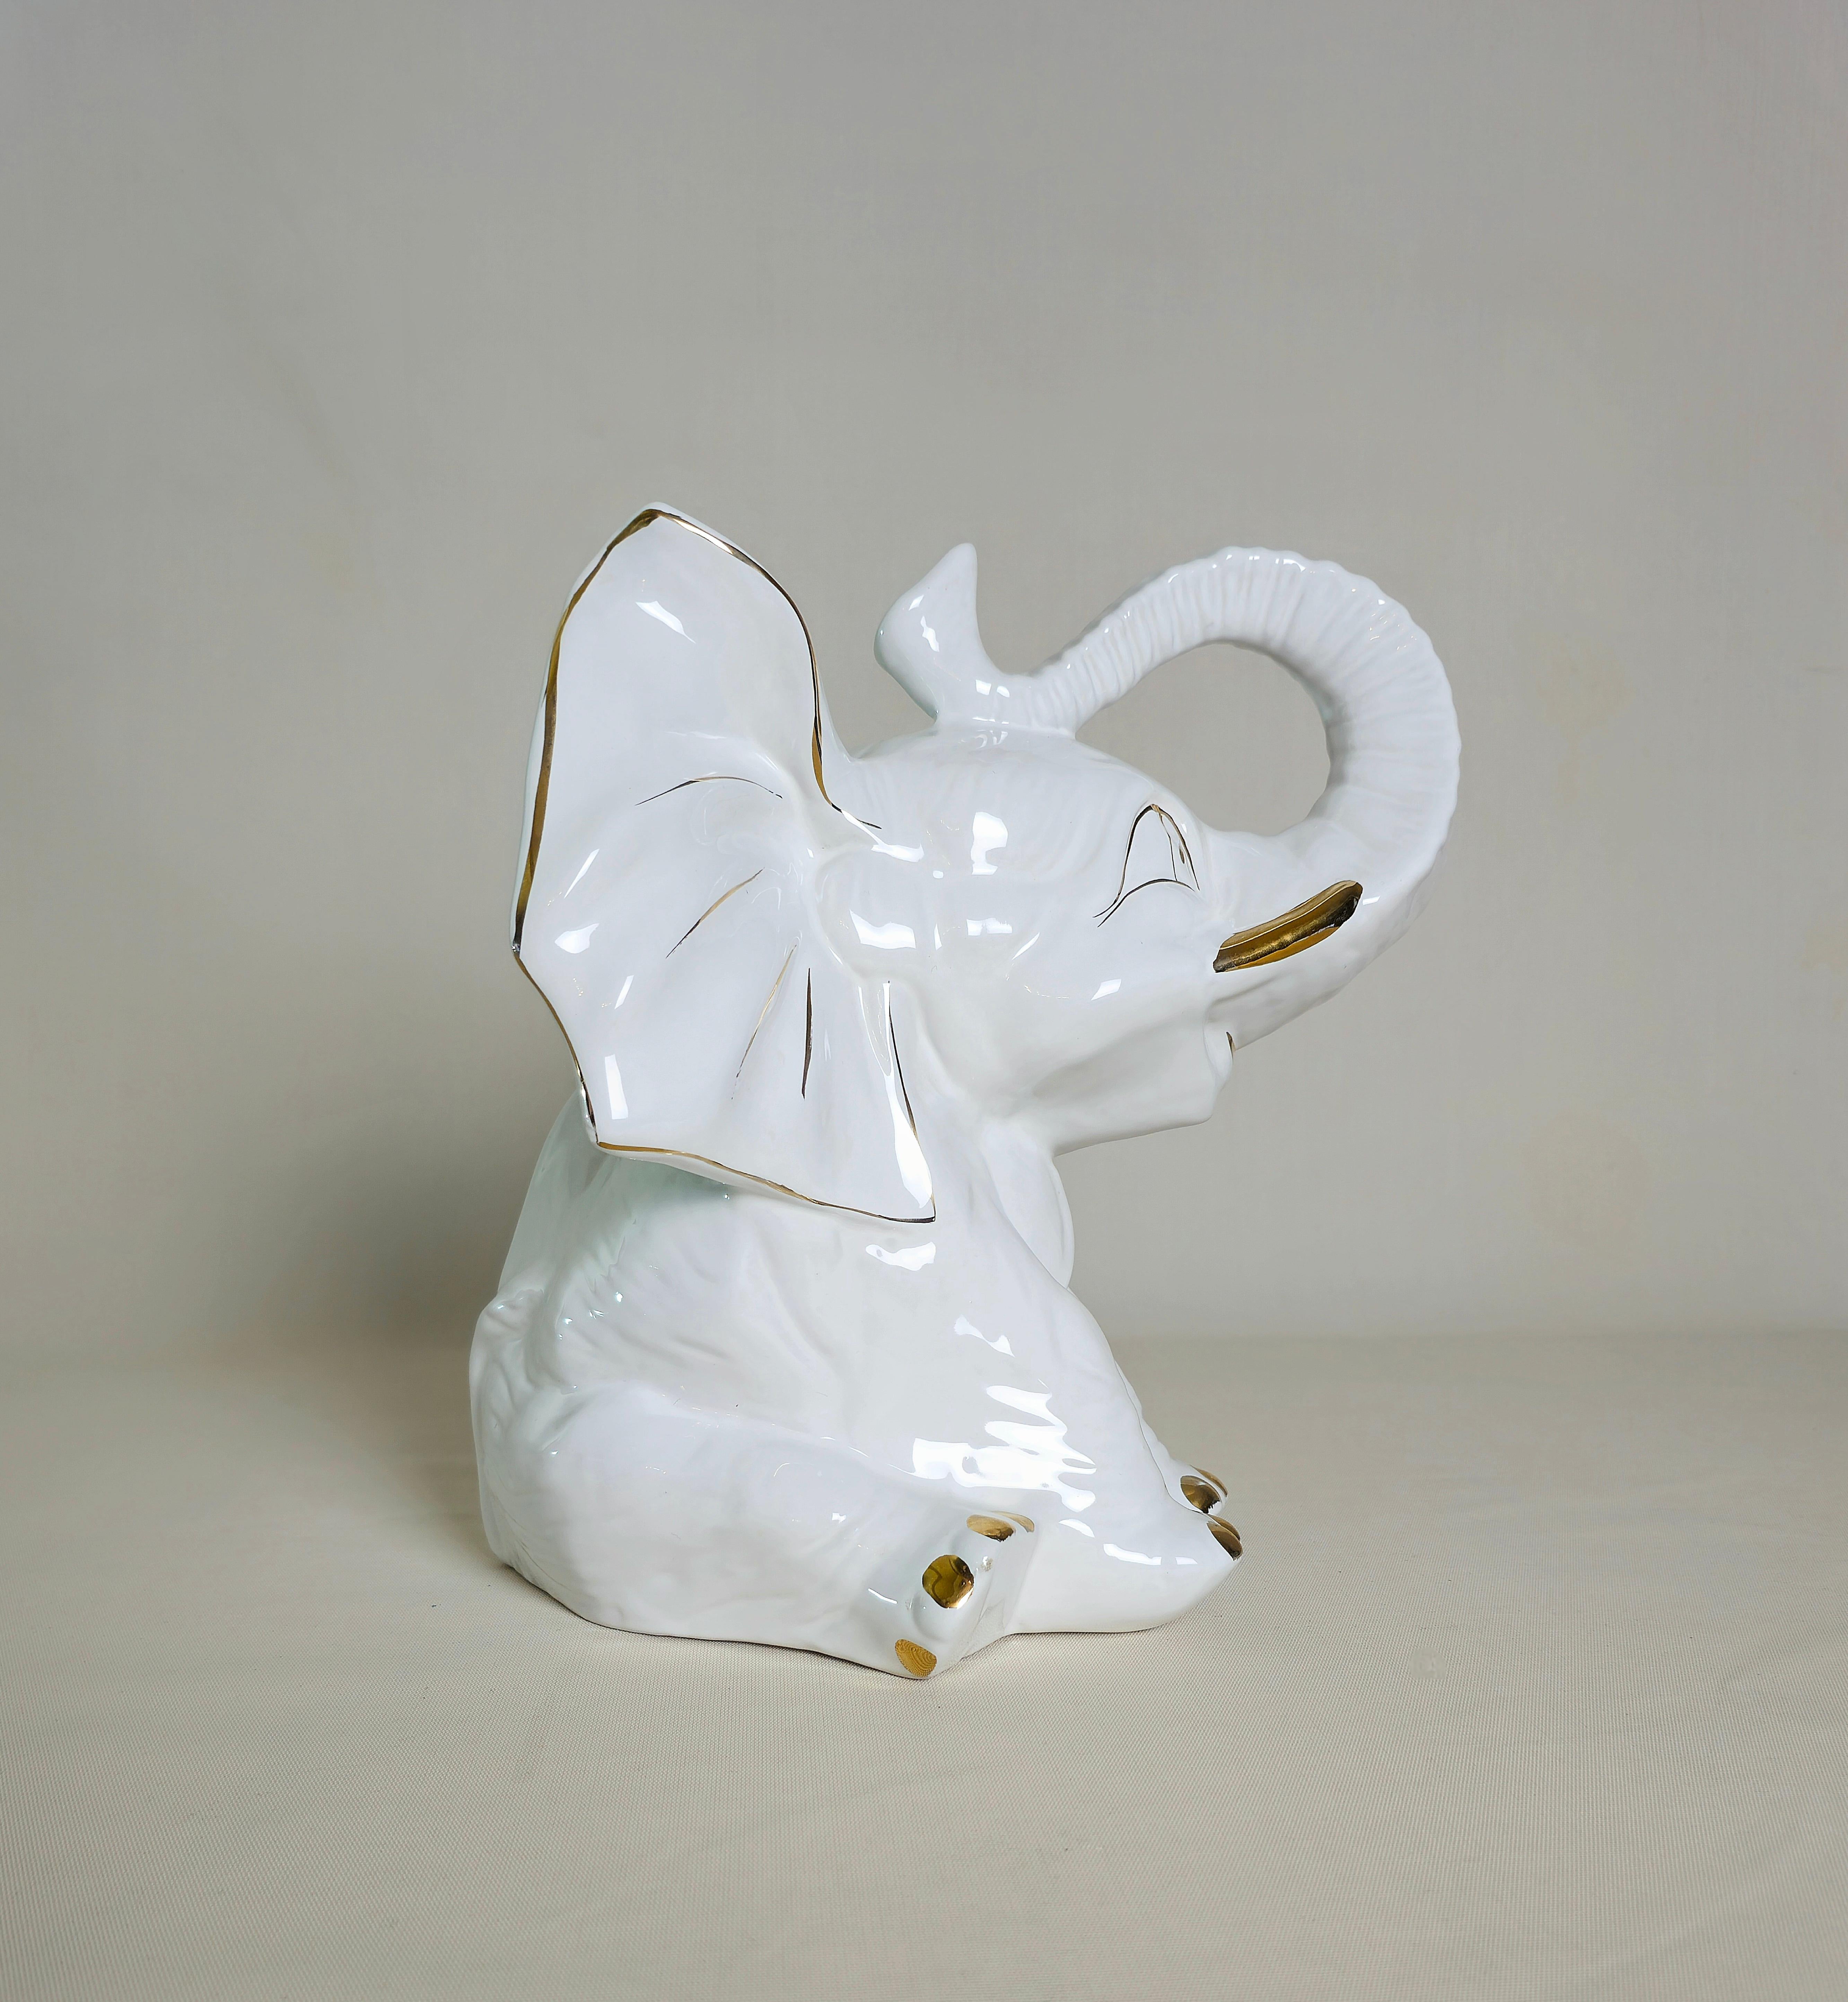 Decorative Object Elephant Porcelain Midcentury Modern Italian Design 1970s In Excellent Condition For Sale In Palermo, IT